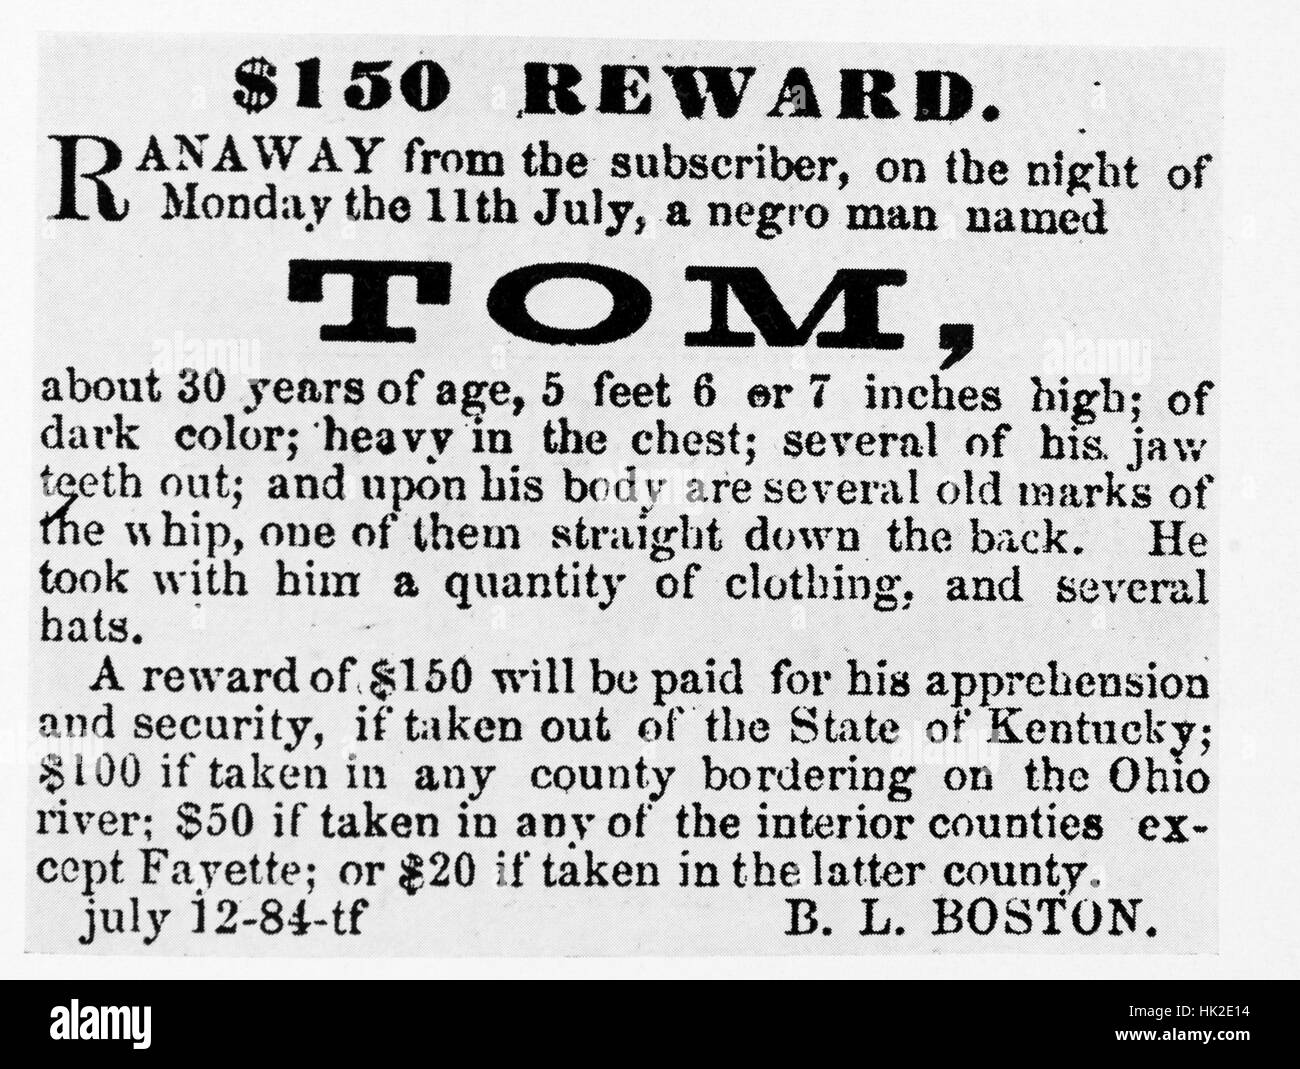 A poster offering a reward of for the capture of a runaway slave identified as Tom, the poster gives a physical description of Tom's body including scars left by whipping, a tiered structure of payment starting at $150 for capture outside of Kentuky and decreasing as low as $20 for capture within Fayette County is listed, the payments all depend on the geographical location of Tom's capture, the notice was created by B.L. Boston, 1940. From the New York Public Library. Stock Photo